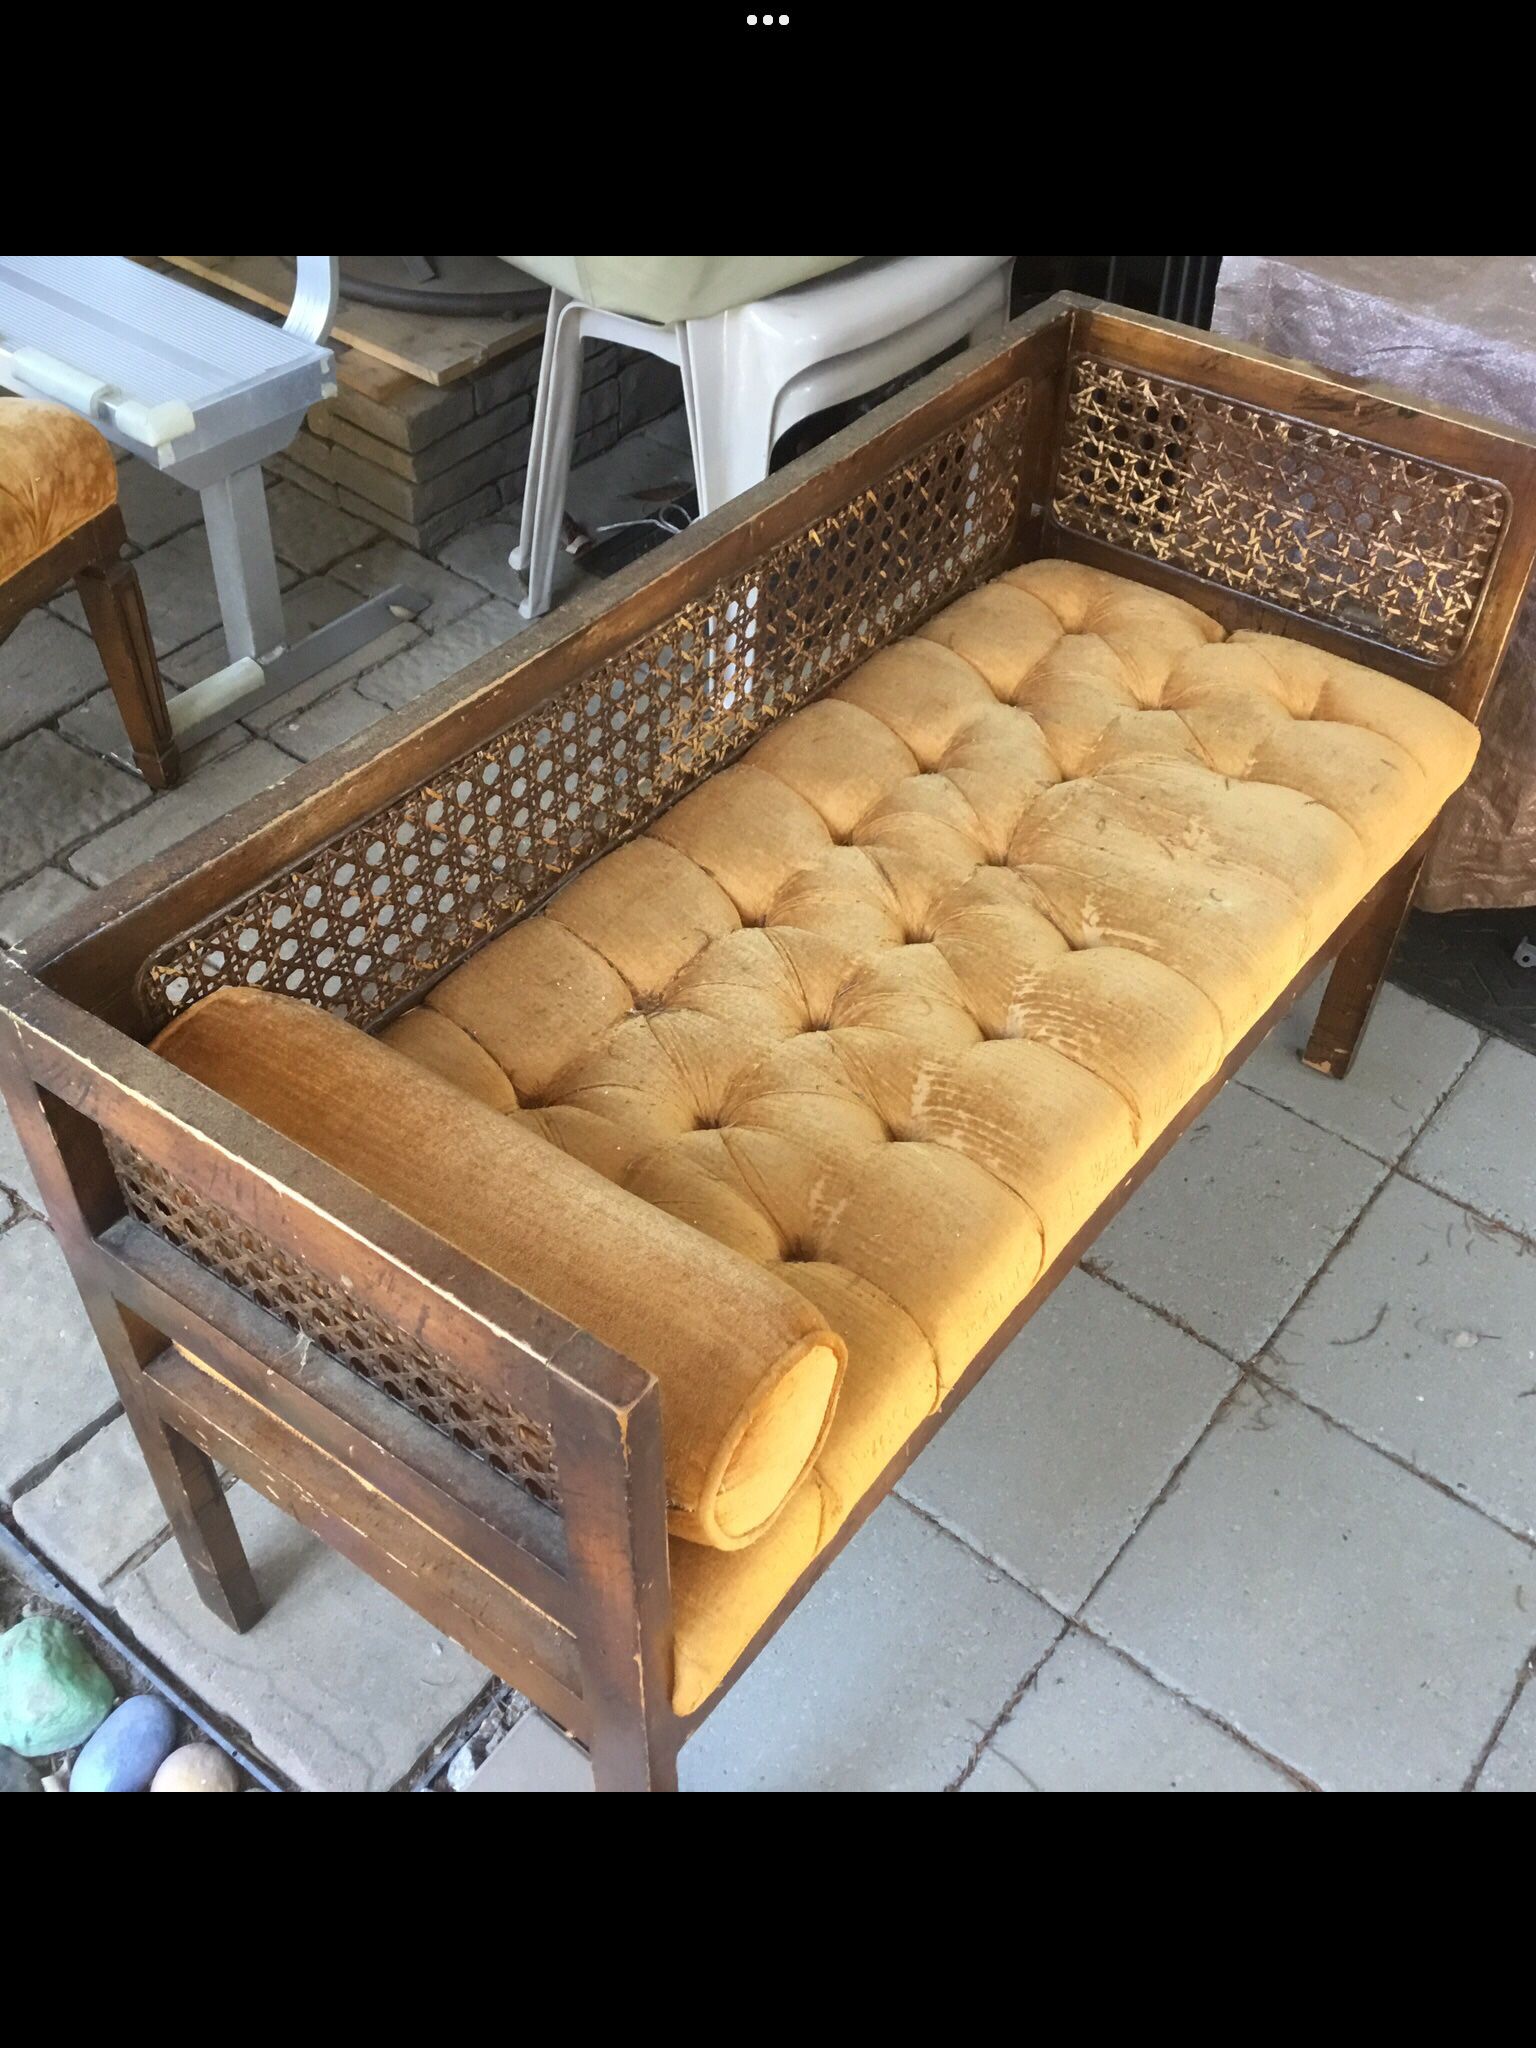 Antique Bench And Chair